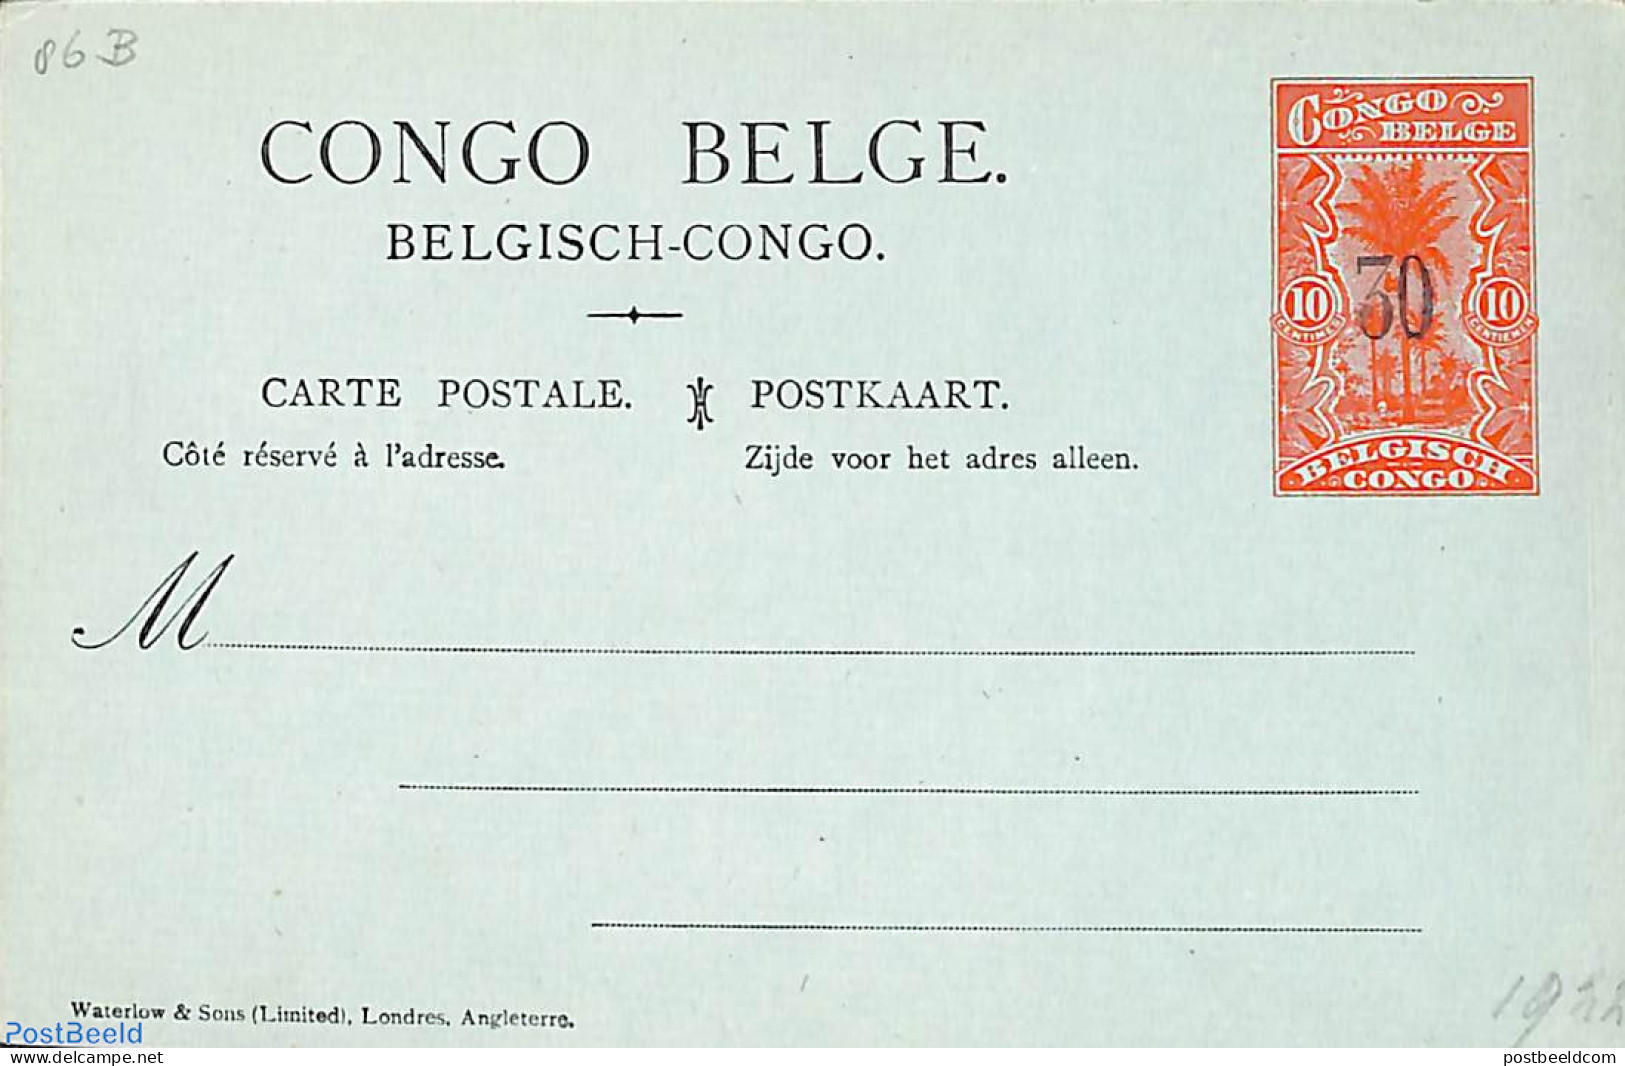 Congo Belgium 1921 Postcard 30c On 10c, Unused Postal Stationary, Nature - Trees & Forests - Rotary, Lions Club